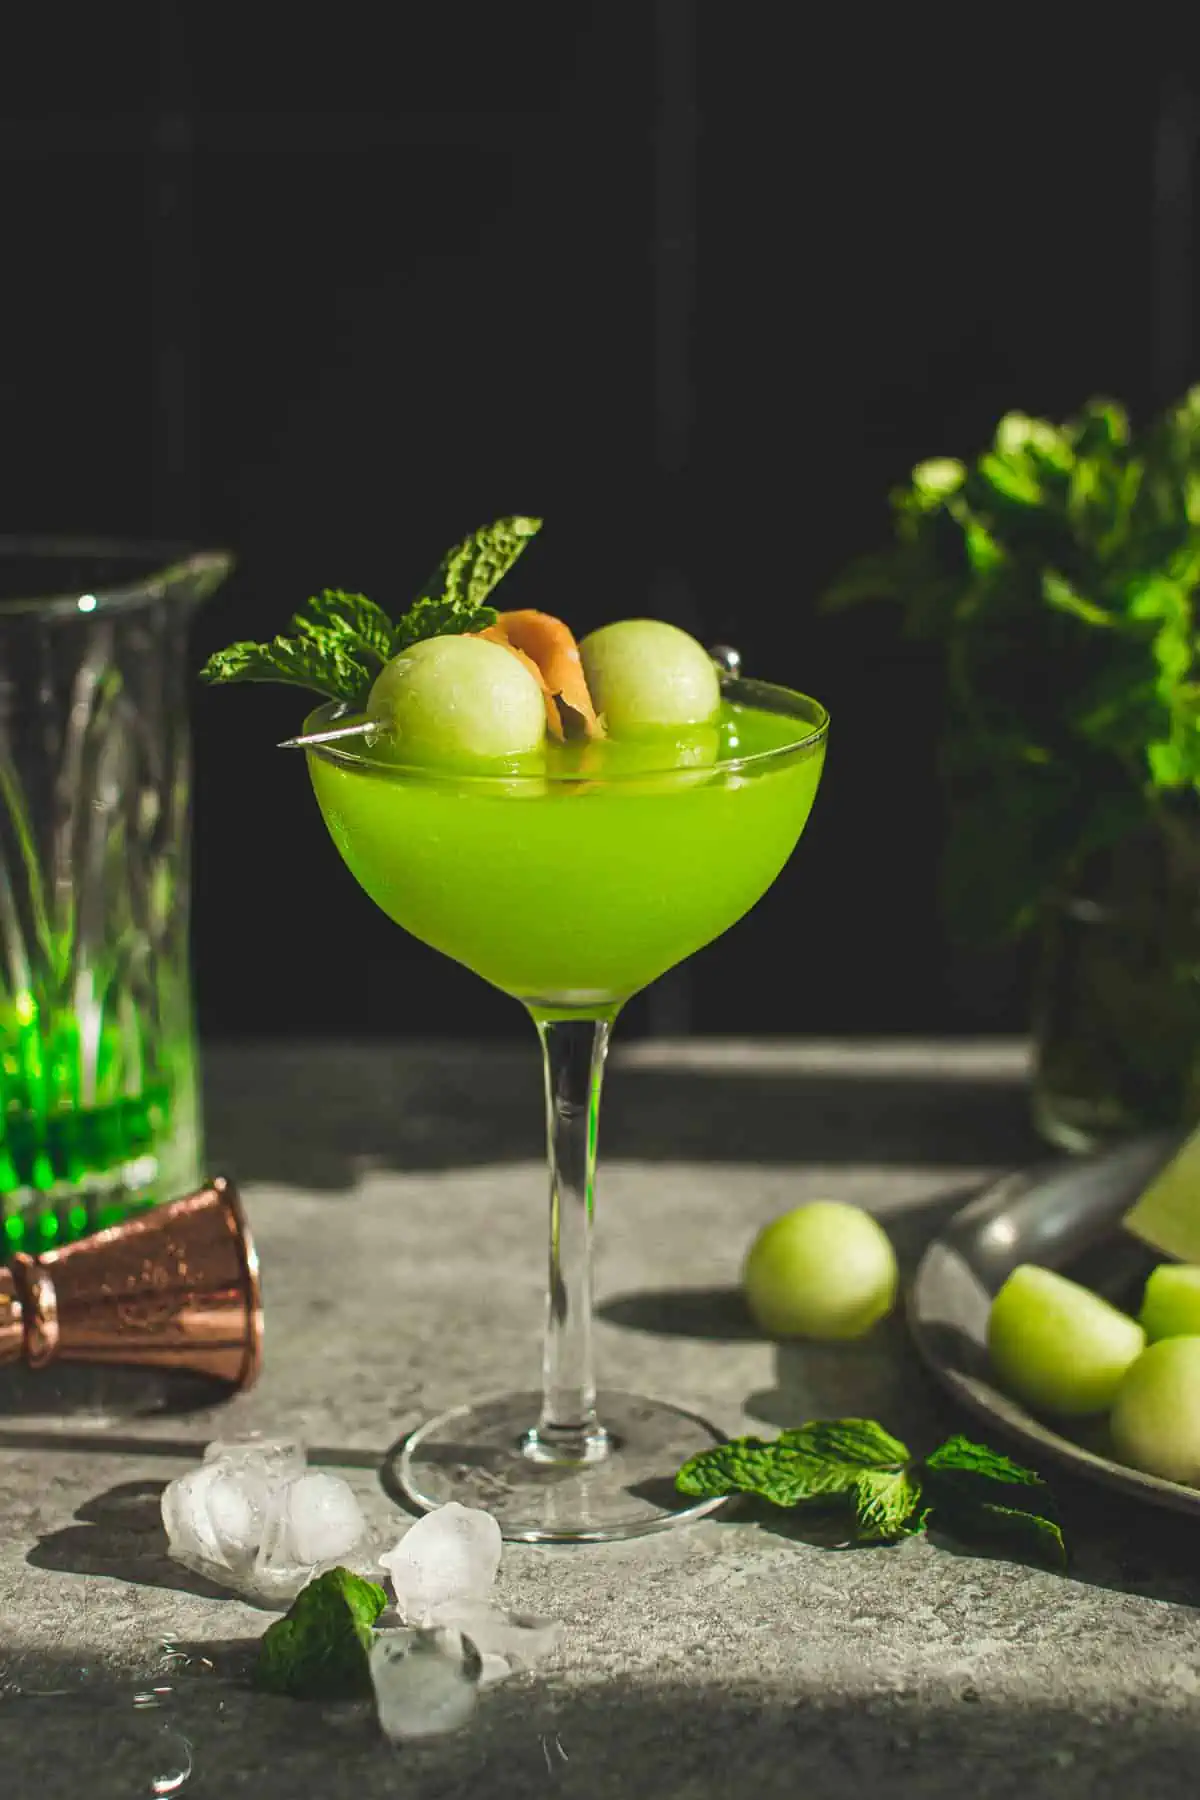 Melon ball drink in a coupe glass.